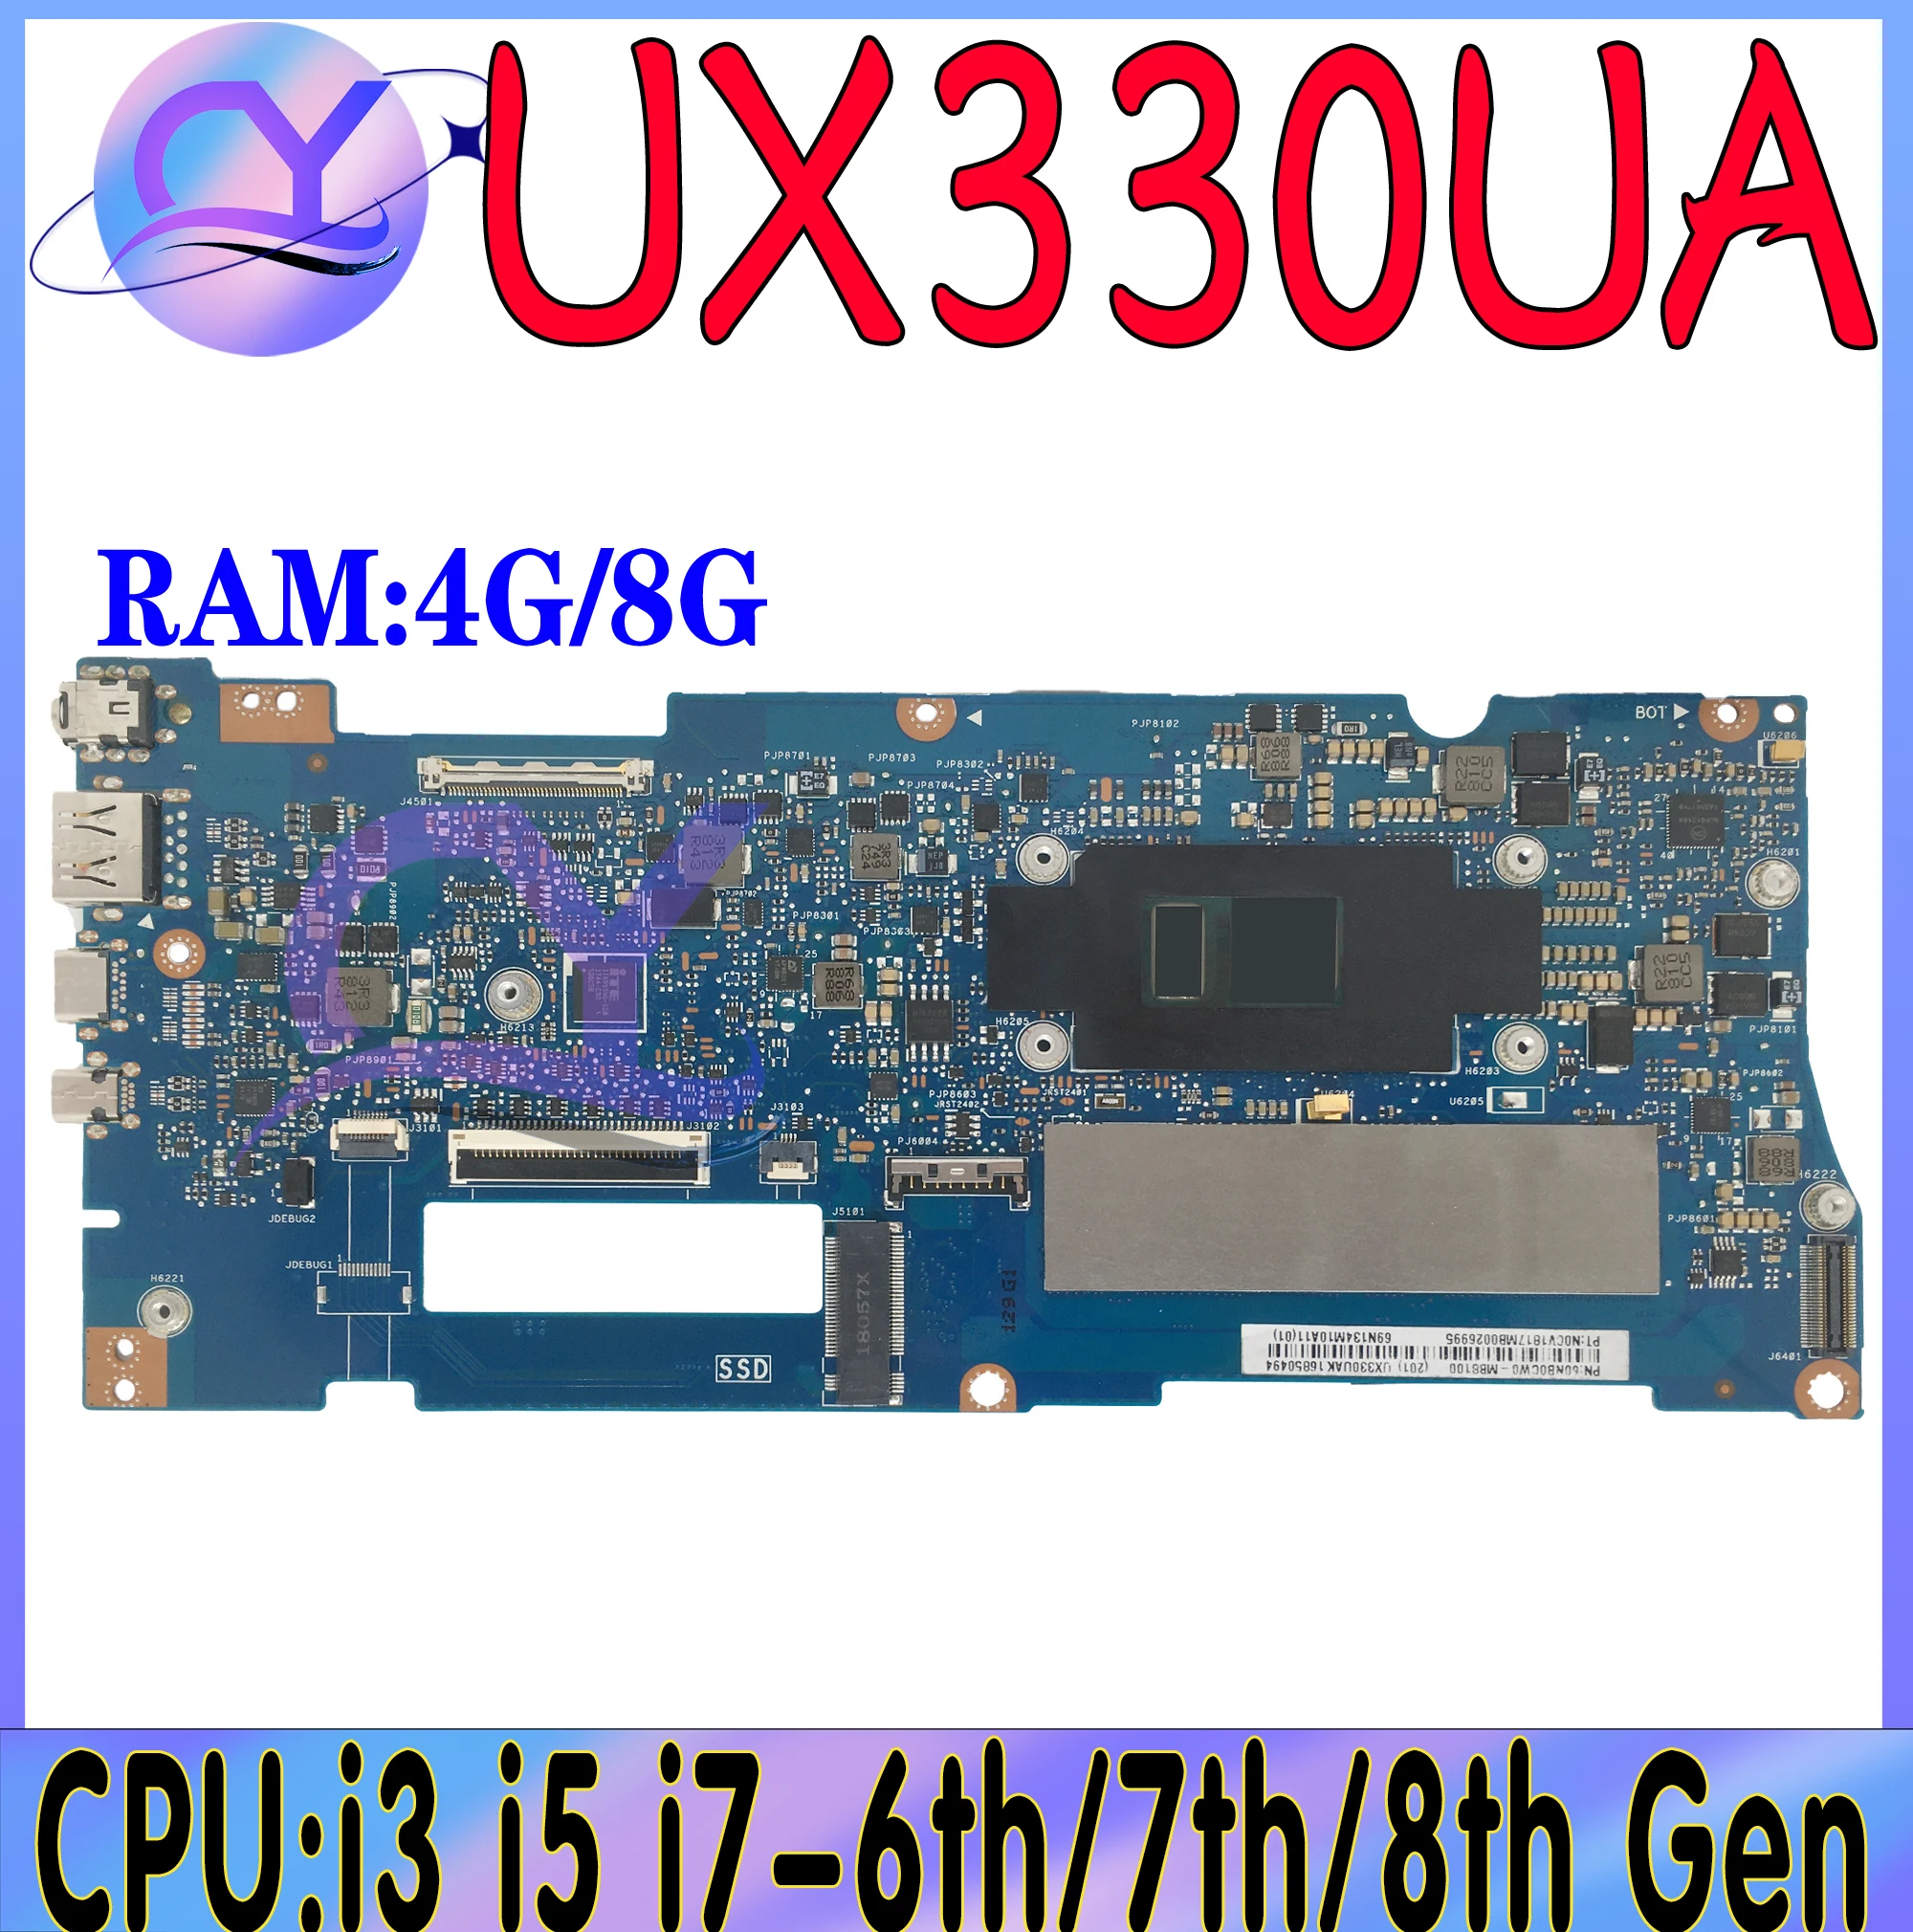 

UX330UA Mainboard For Asus ZenBook UX330UAR UX330UAK Laptop Motherboard With i3 i5 i7-6th/7th/8th Gen 4GB/8GB-RAM 100% Test Well